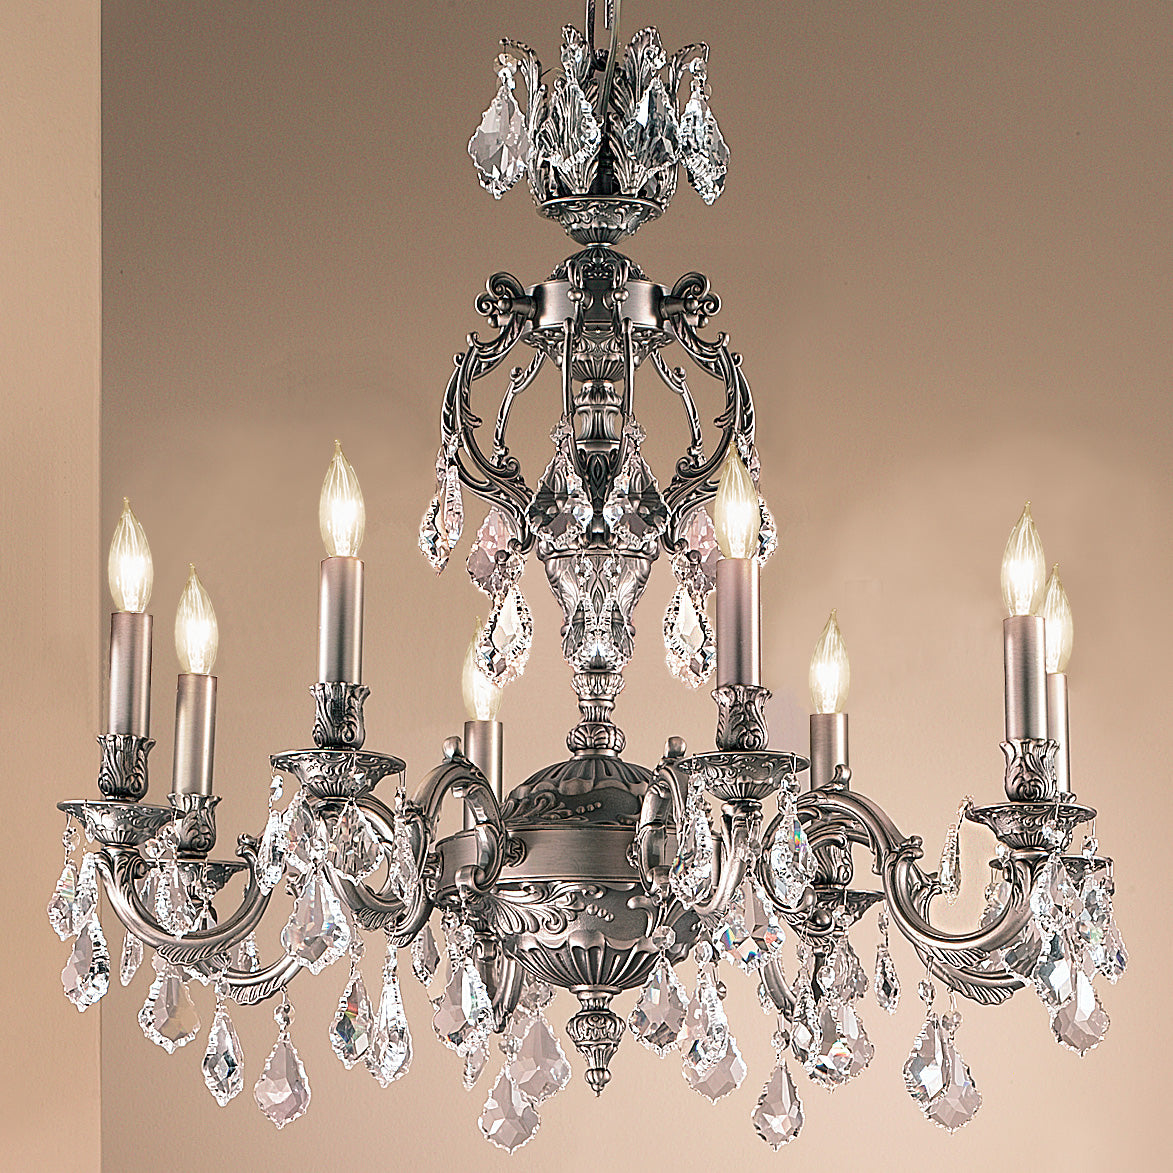 Classic Lighting 57378 AGB SGT Chateau Crystal Chandelier in Aged Bronze (Imported from Spain)